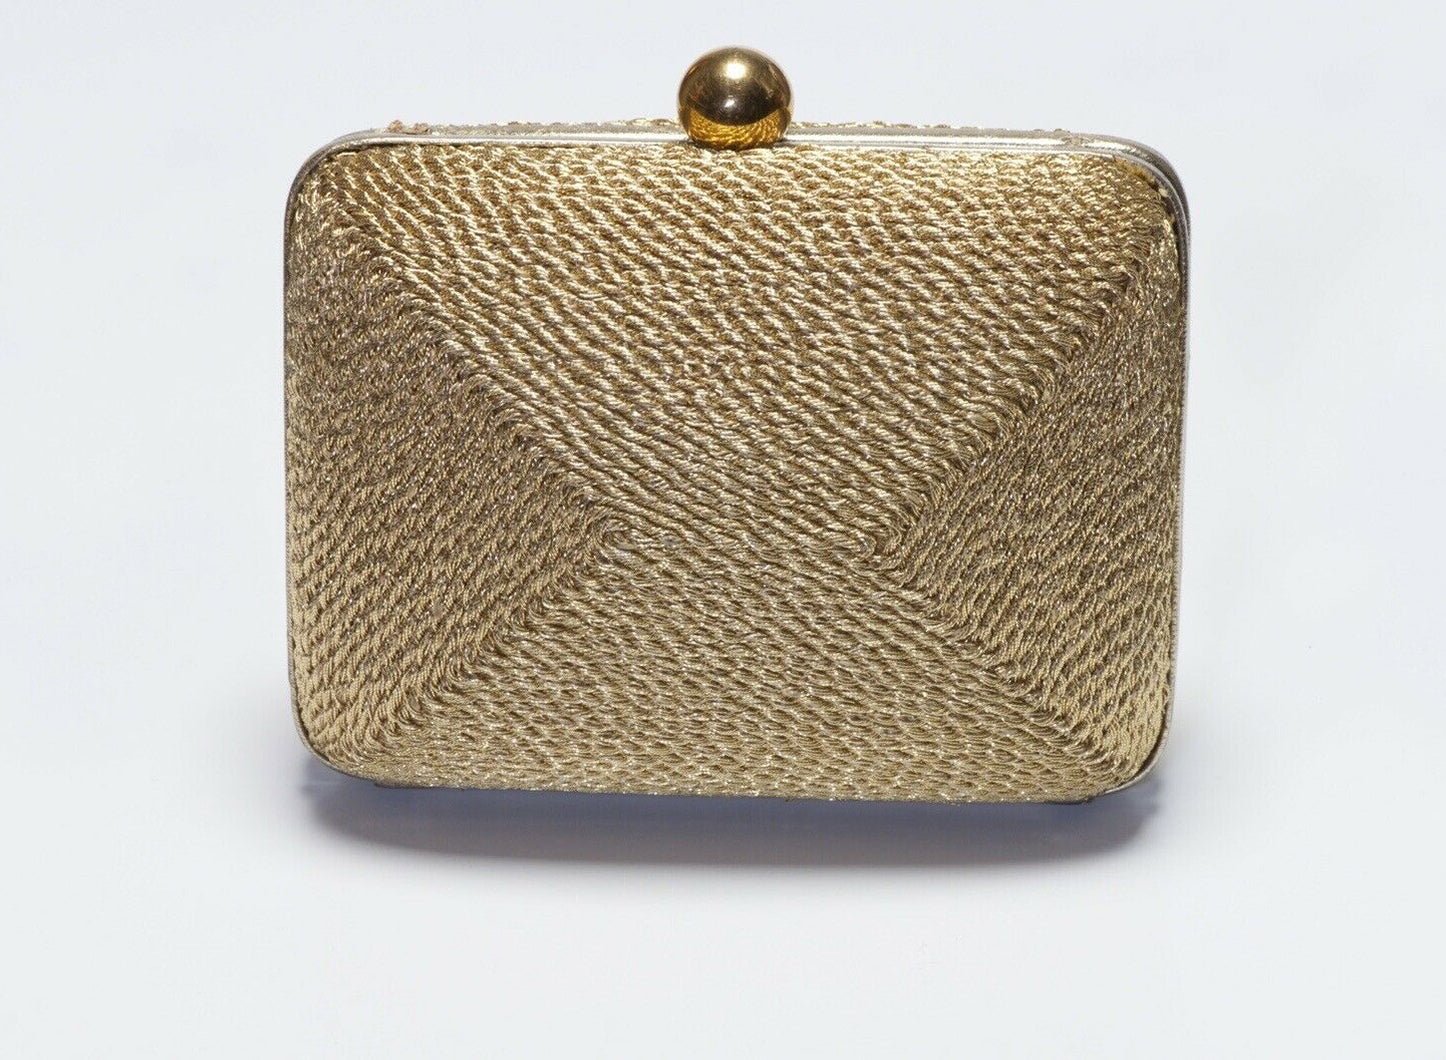 Vintage 1990’s CHANEL CC Gold Leather Woven Clutch Bag